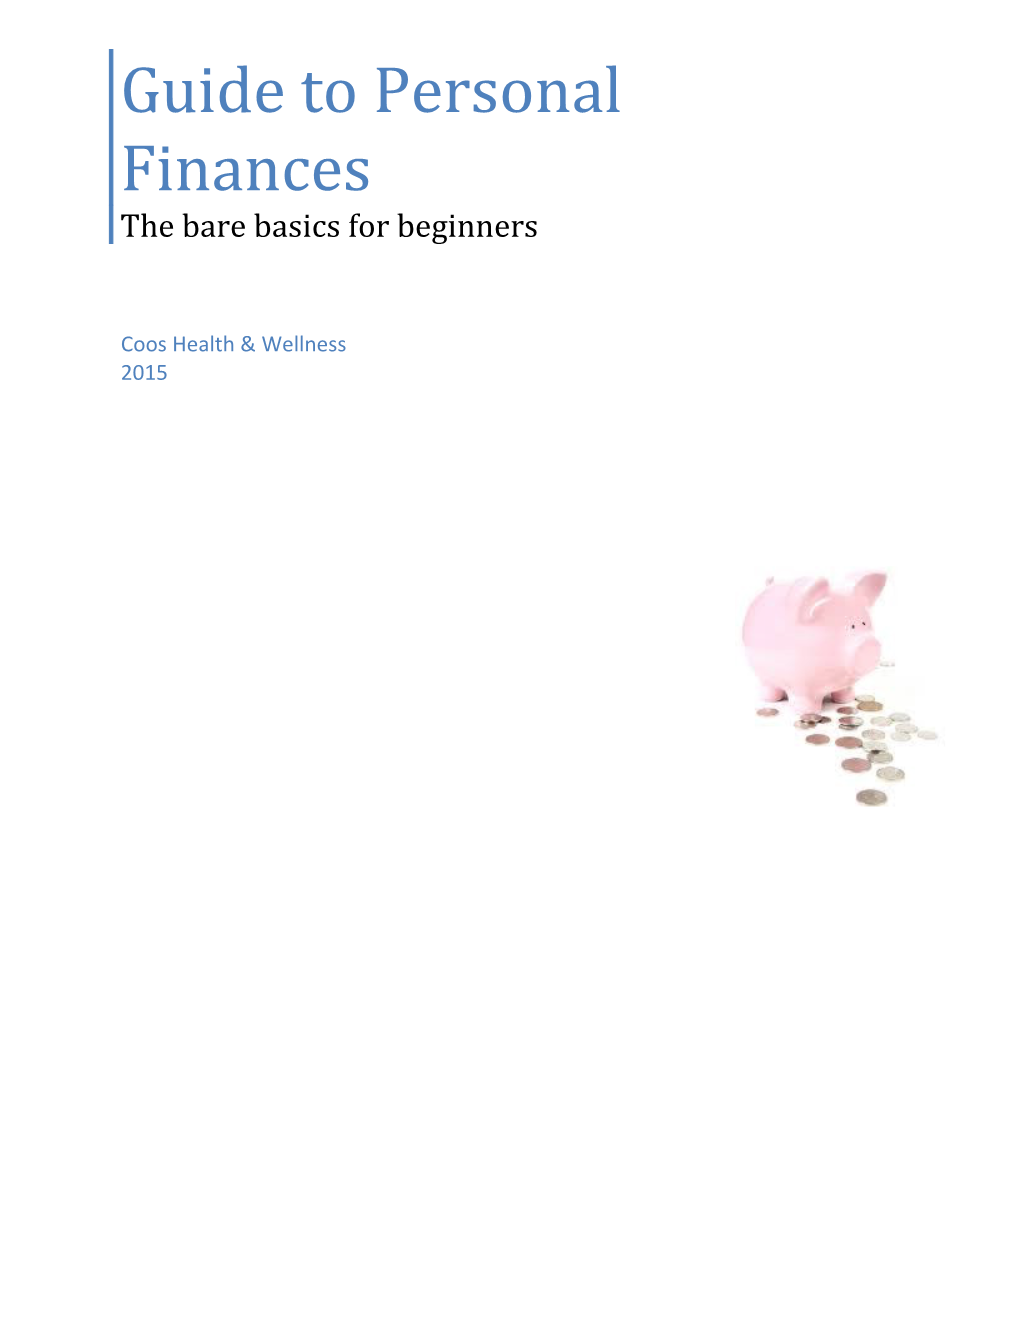 Guide to Personal Finances